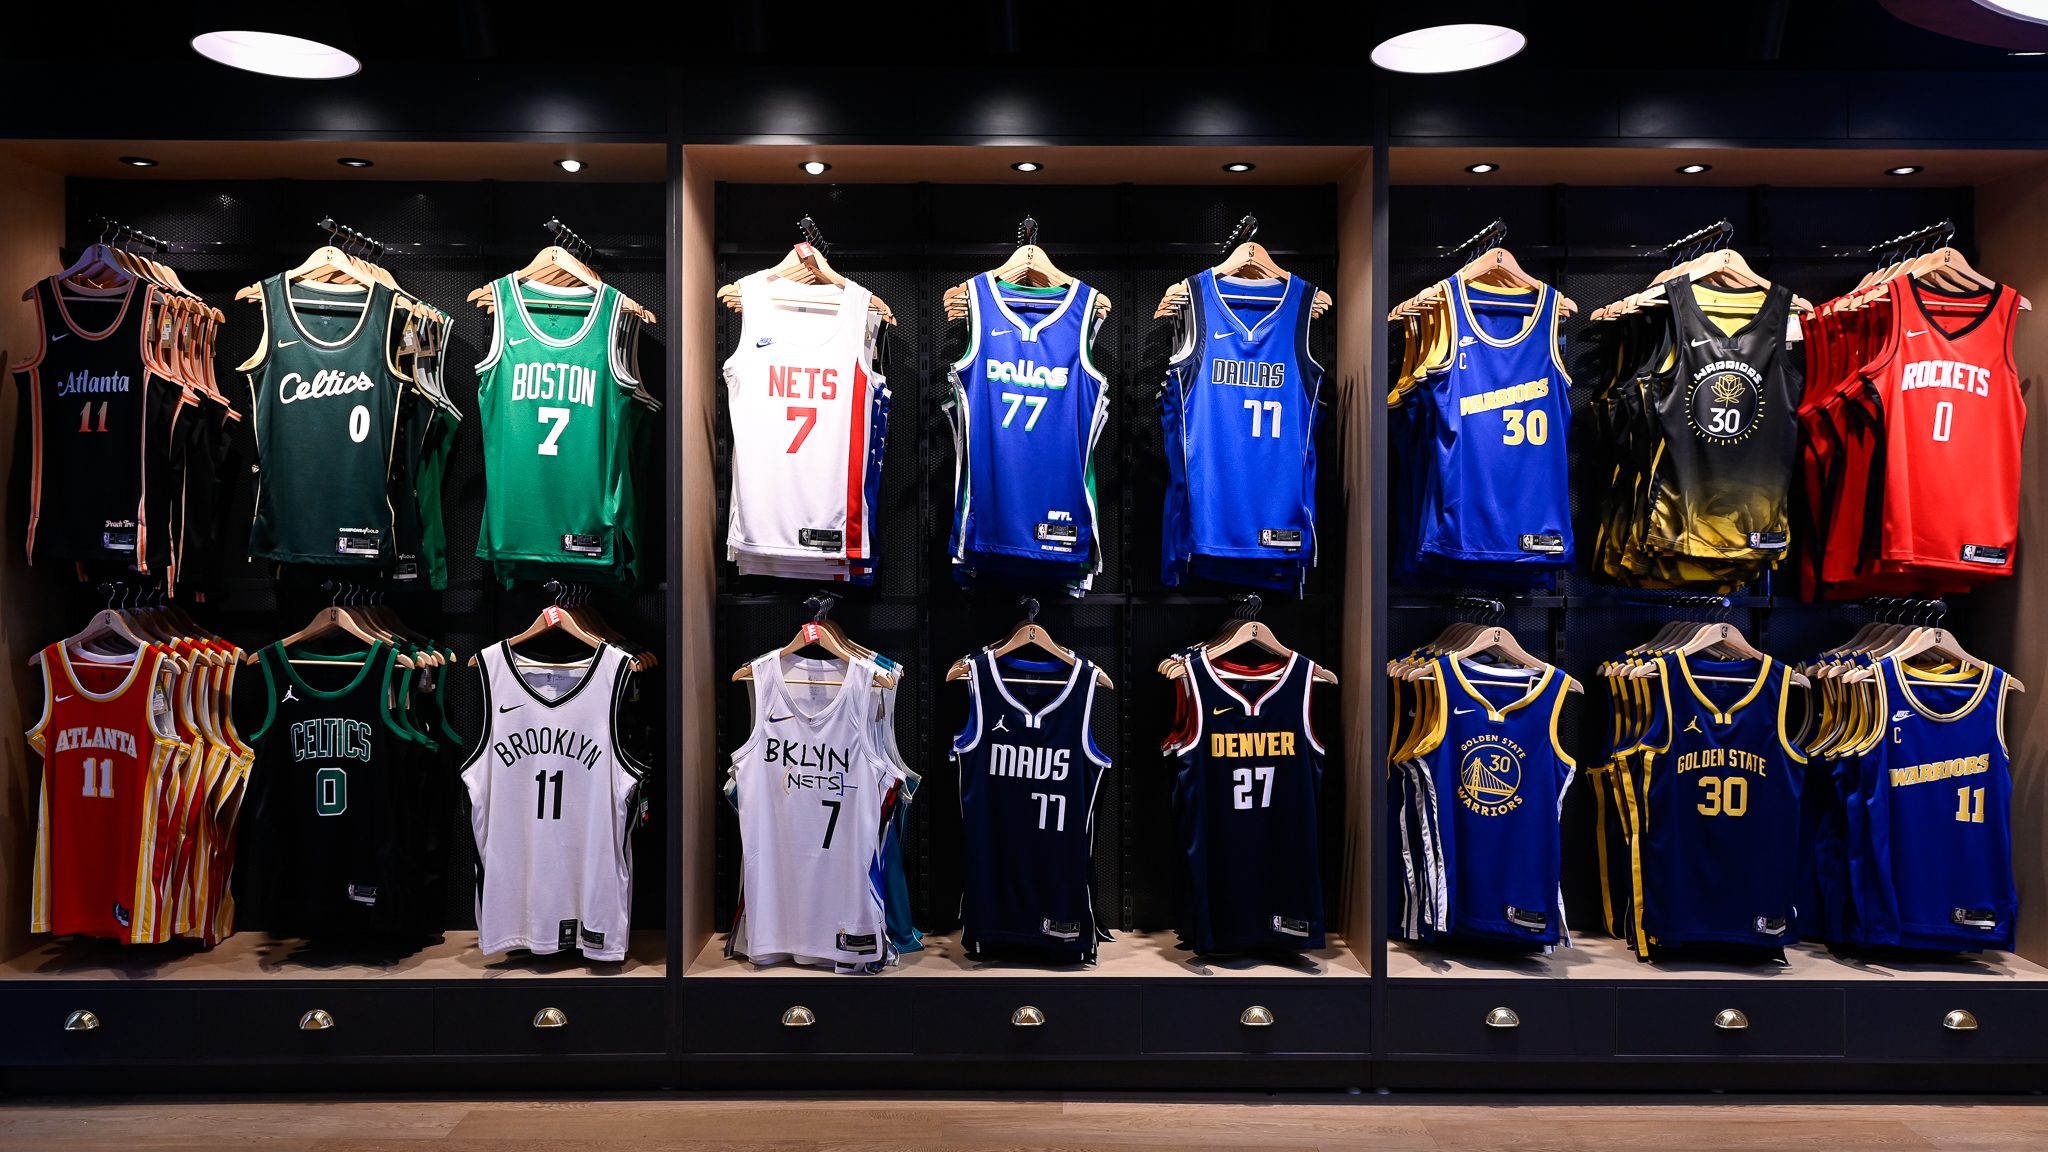 Basketball budol: Largest NBA Store in the Philippines set to open this May